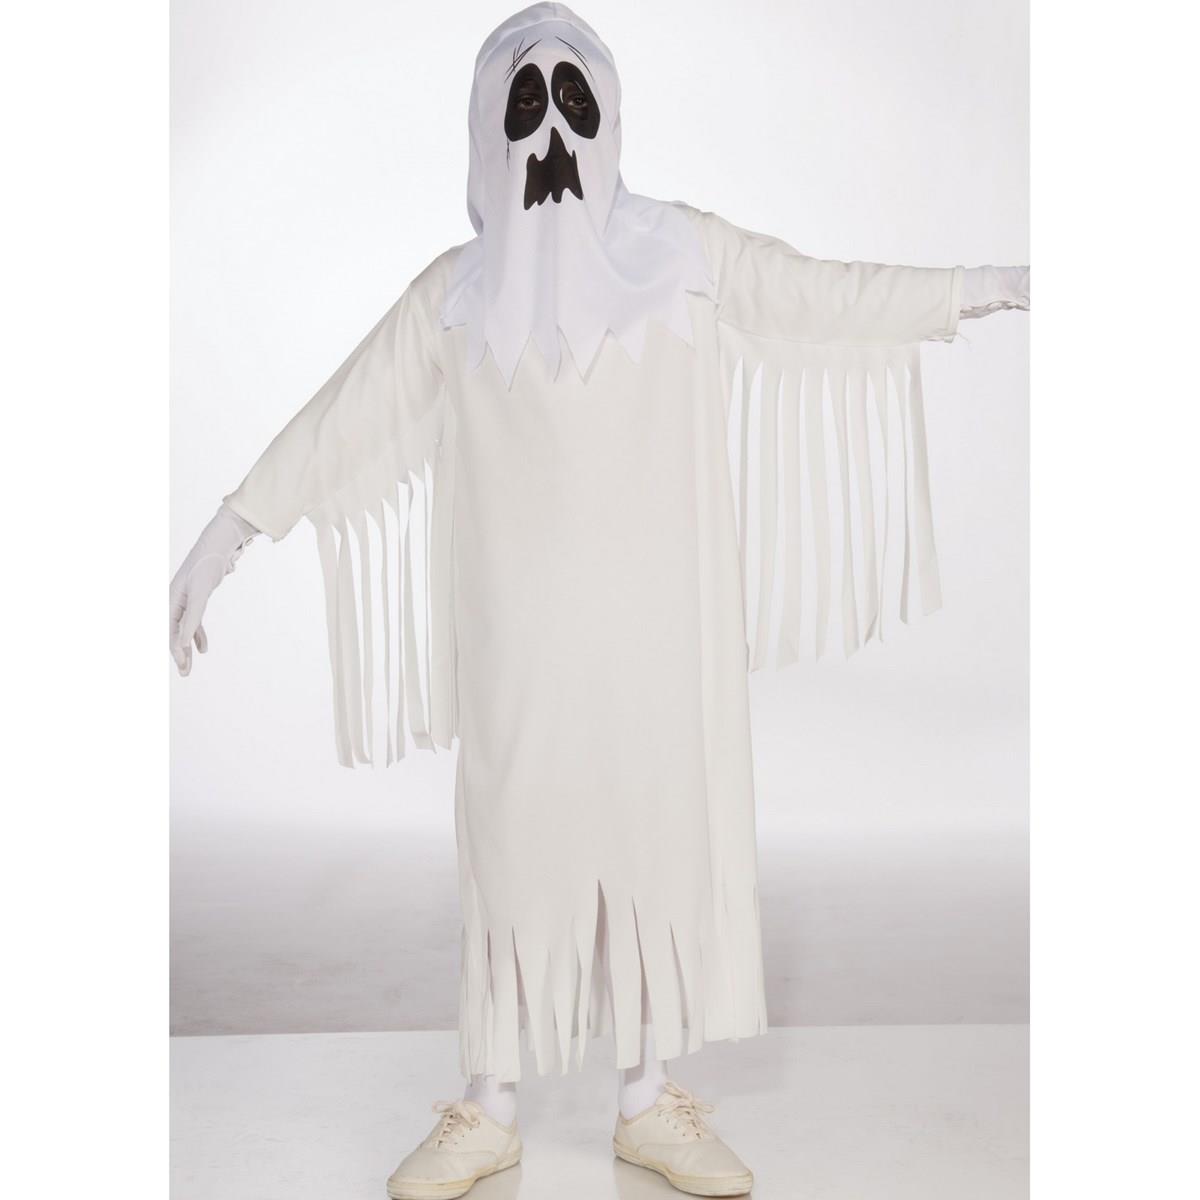 Picture of Forum Novelties Costumes 277219 Child Ghost Costume, Small